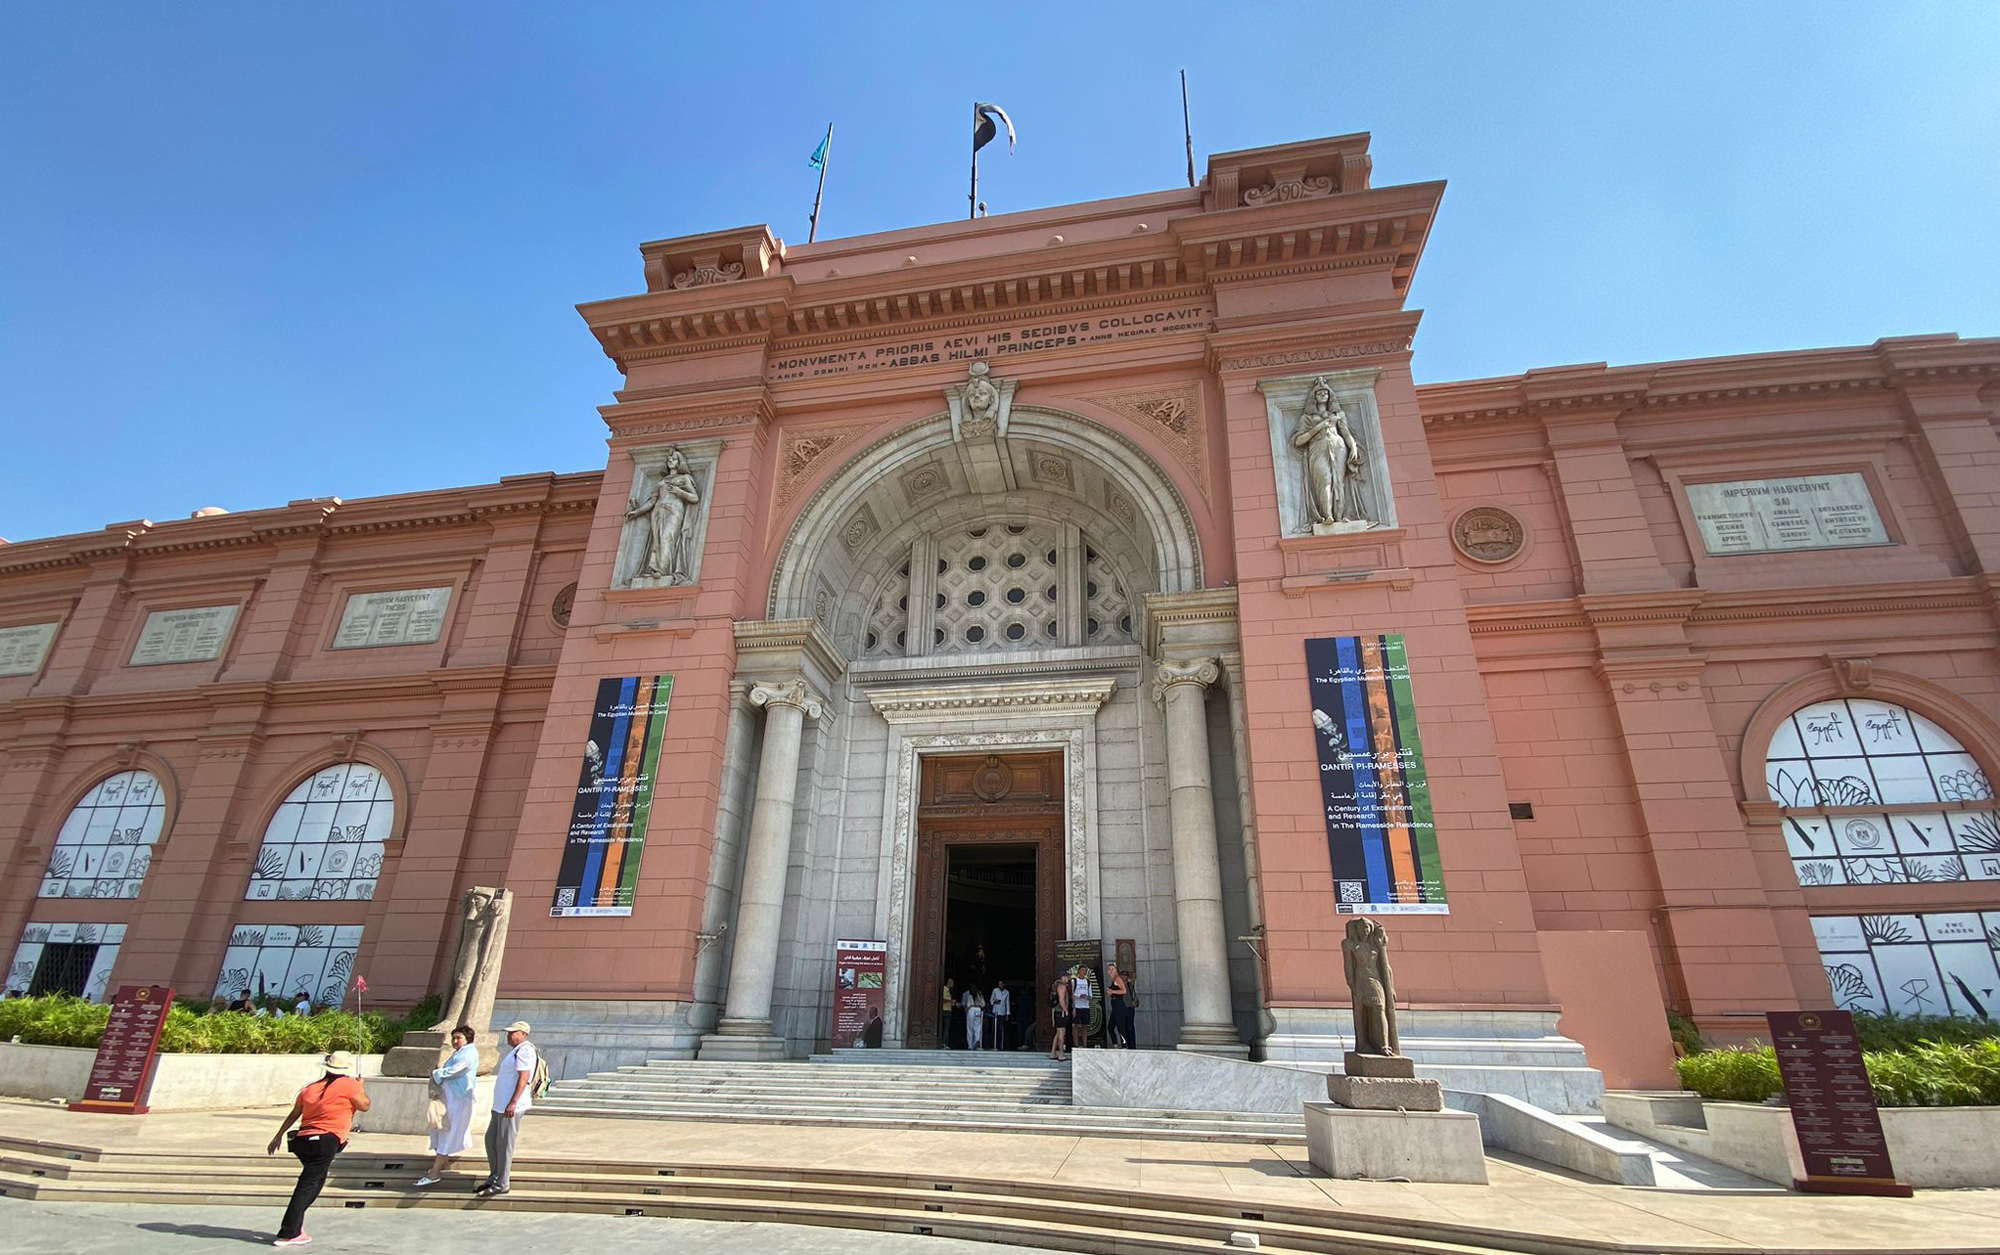 Entrance of the Egyptian Museum in Cairo | Photo from H. Franzmeier